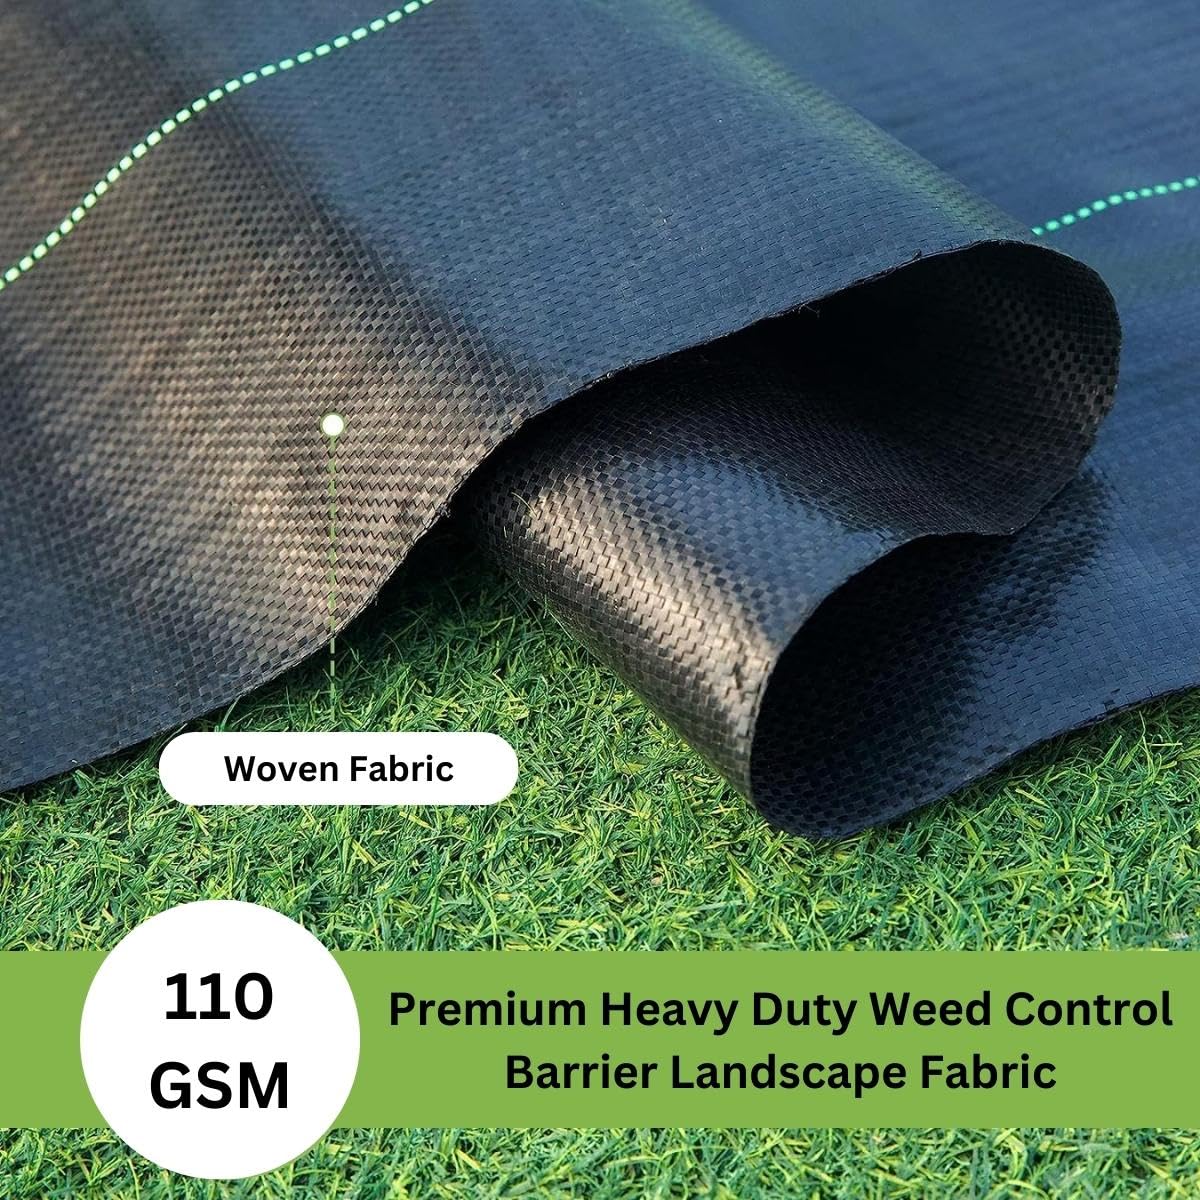 Singhal Premium Garden Weed Control Barrier Sheet Mat 2 Meter x 25 Meter, Landscape Fabric 110 GSM Heavy Duty Weed Block Gardening Mat for Gardens, Agriculture, Outdoor Projects (Black)